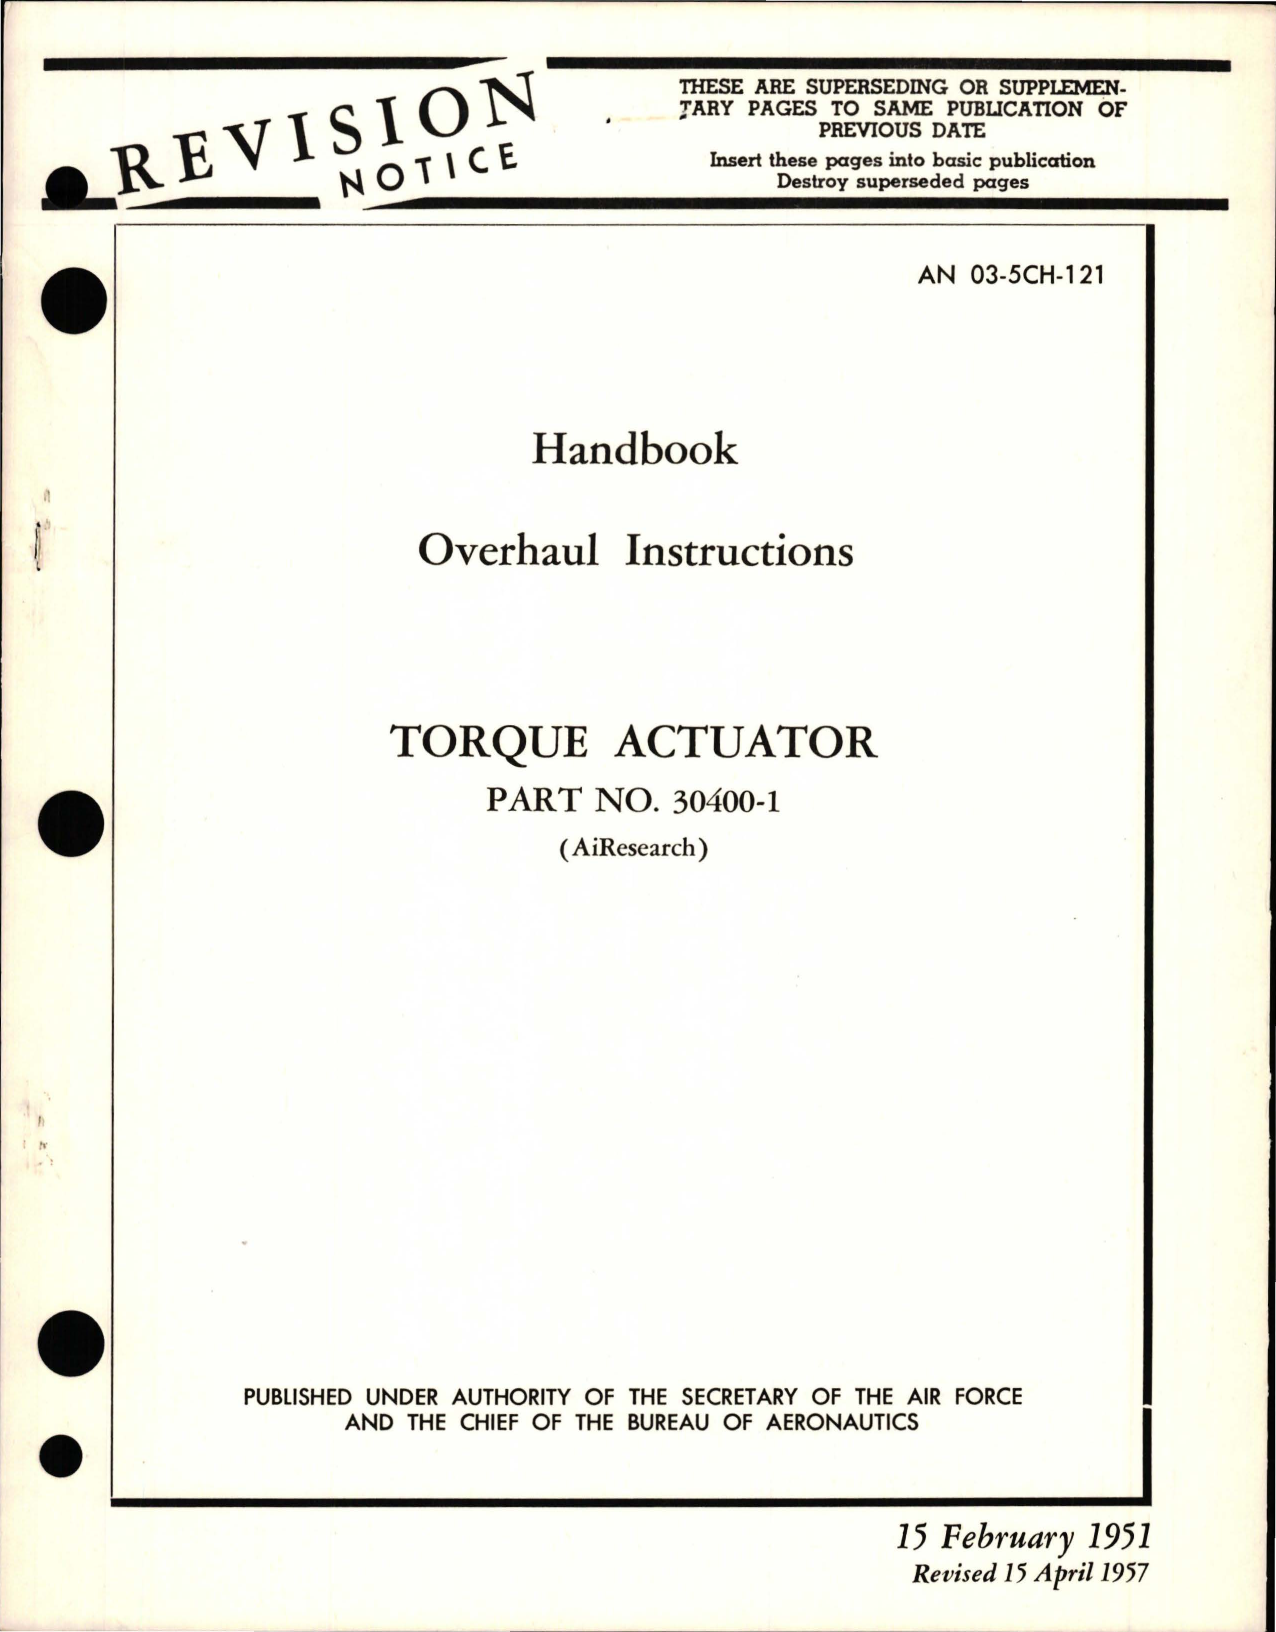 Sample page 1 from AirCorps Library document: Overhaul Instructions for Actuator Assembly - Model 30400-1